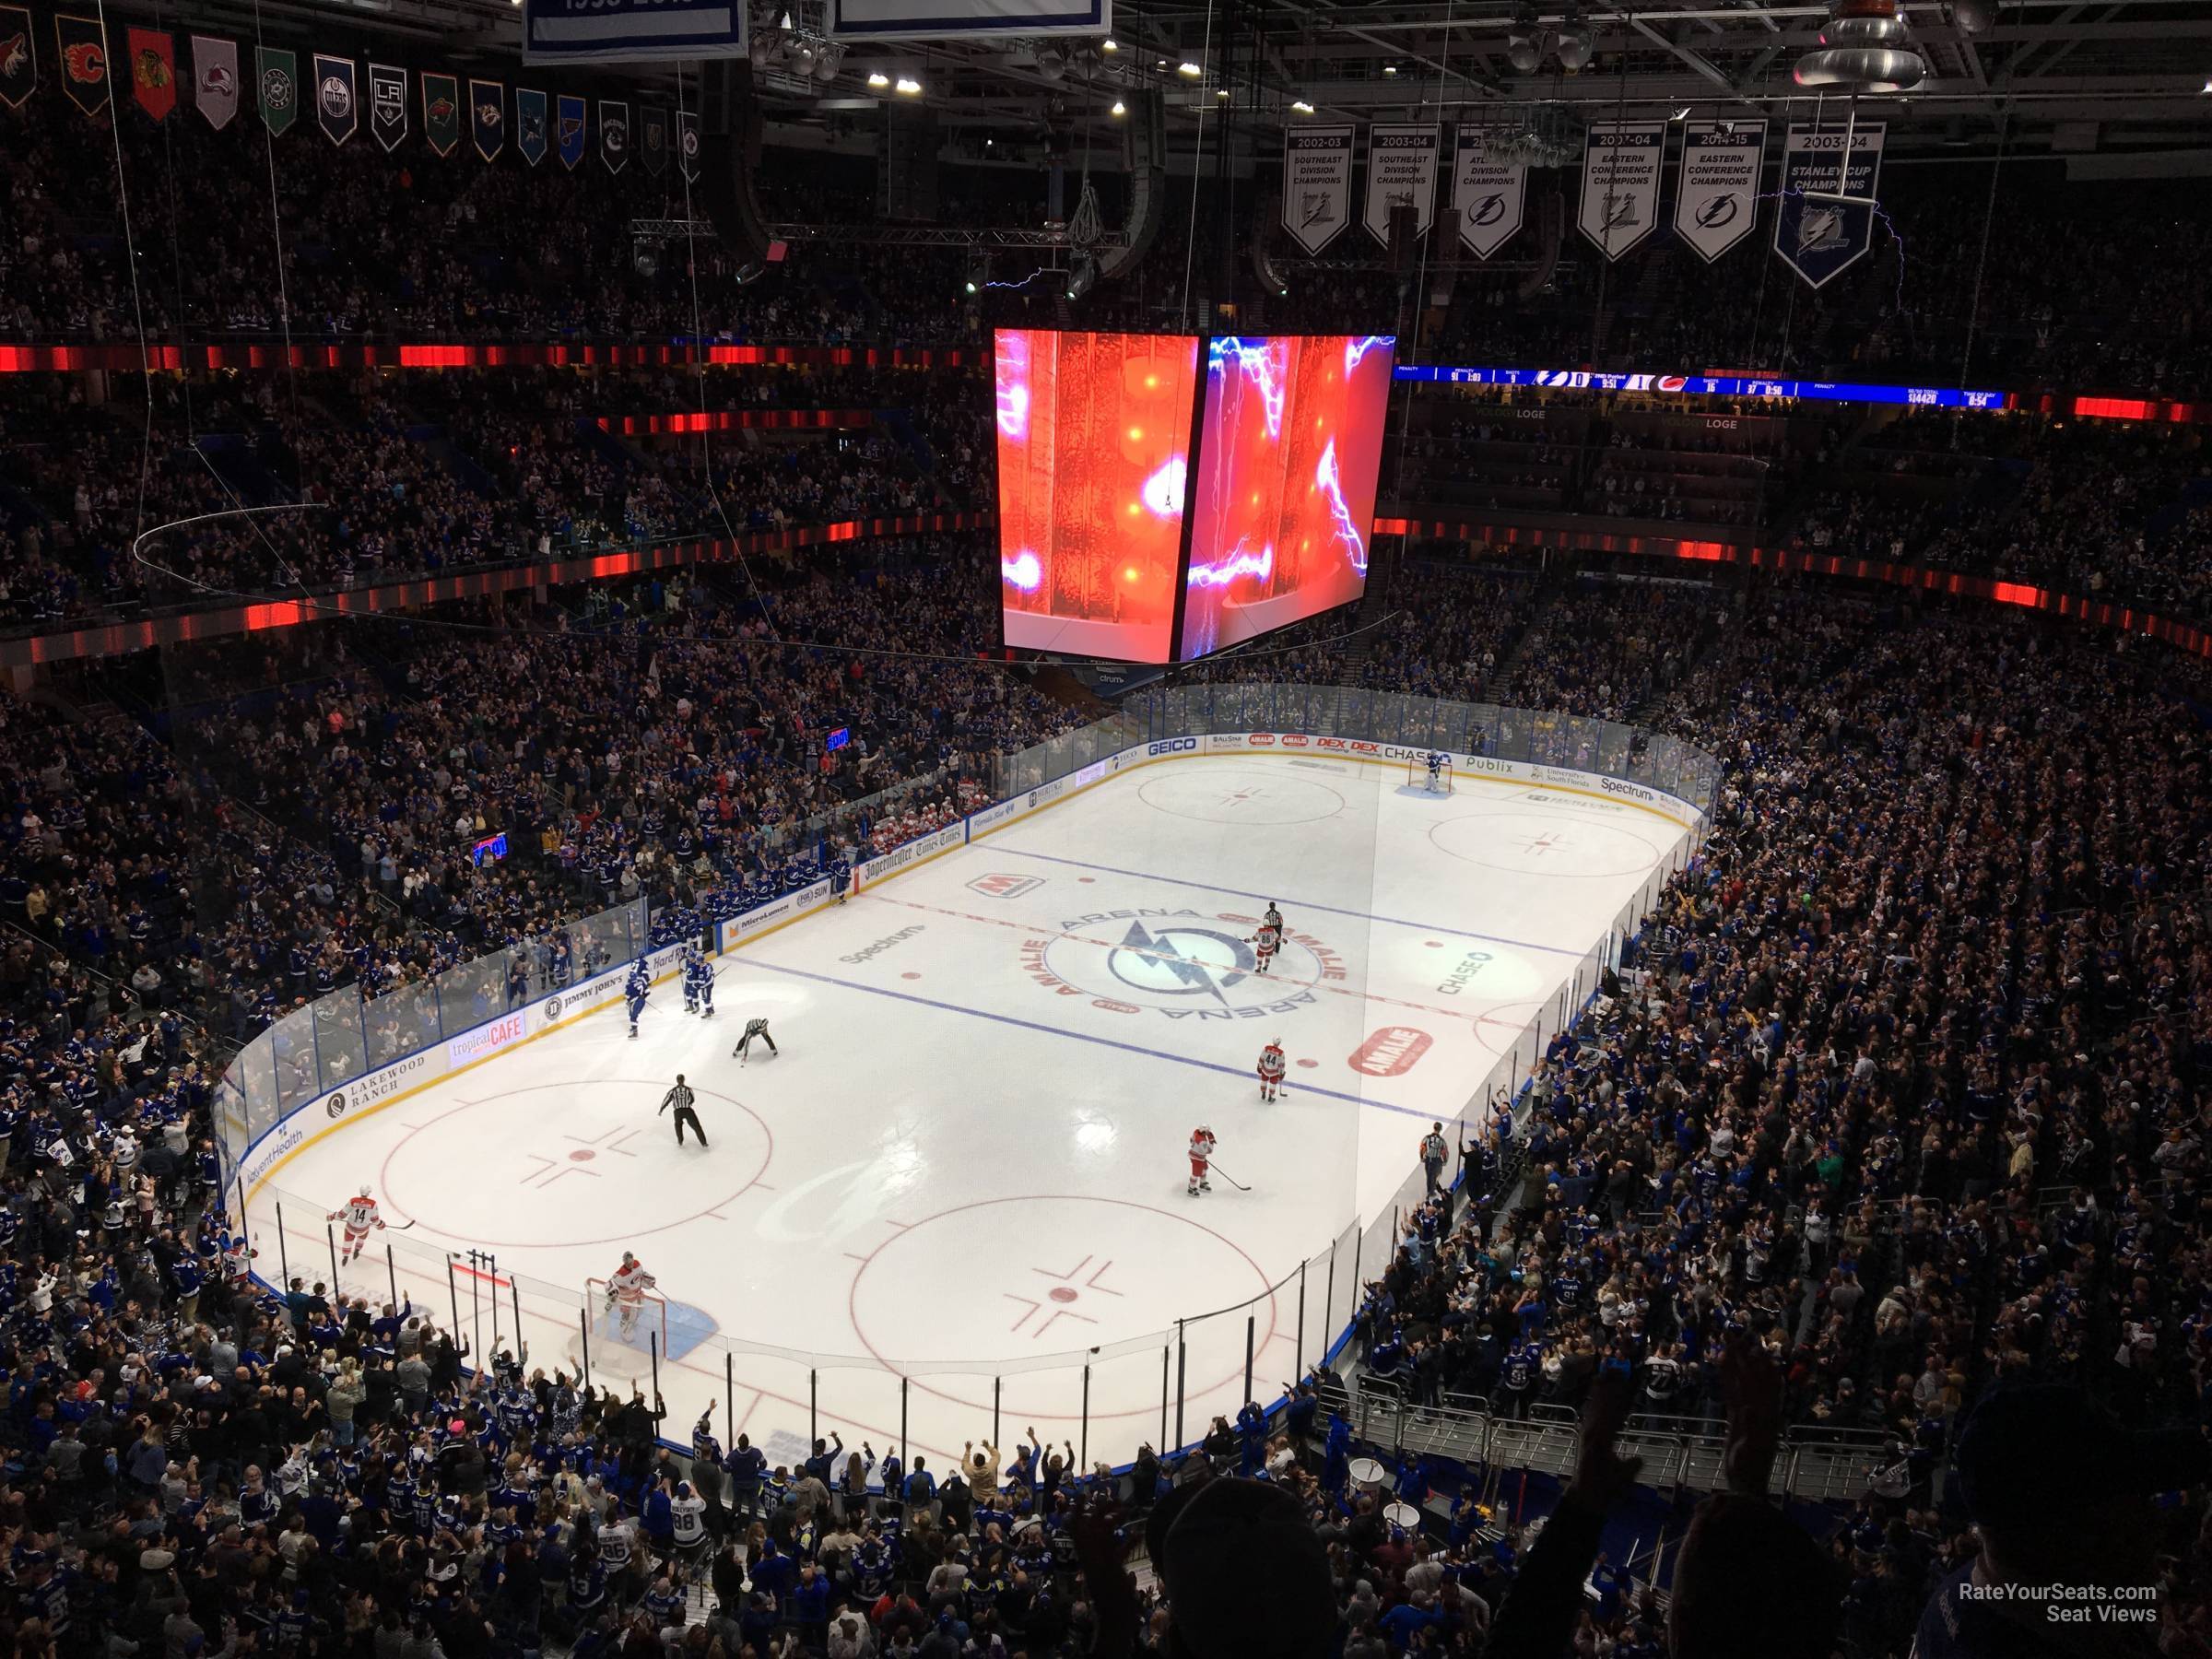 Section 321 at Amalie Arena 